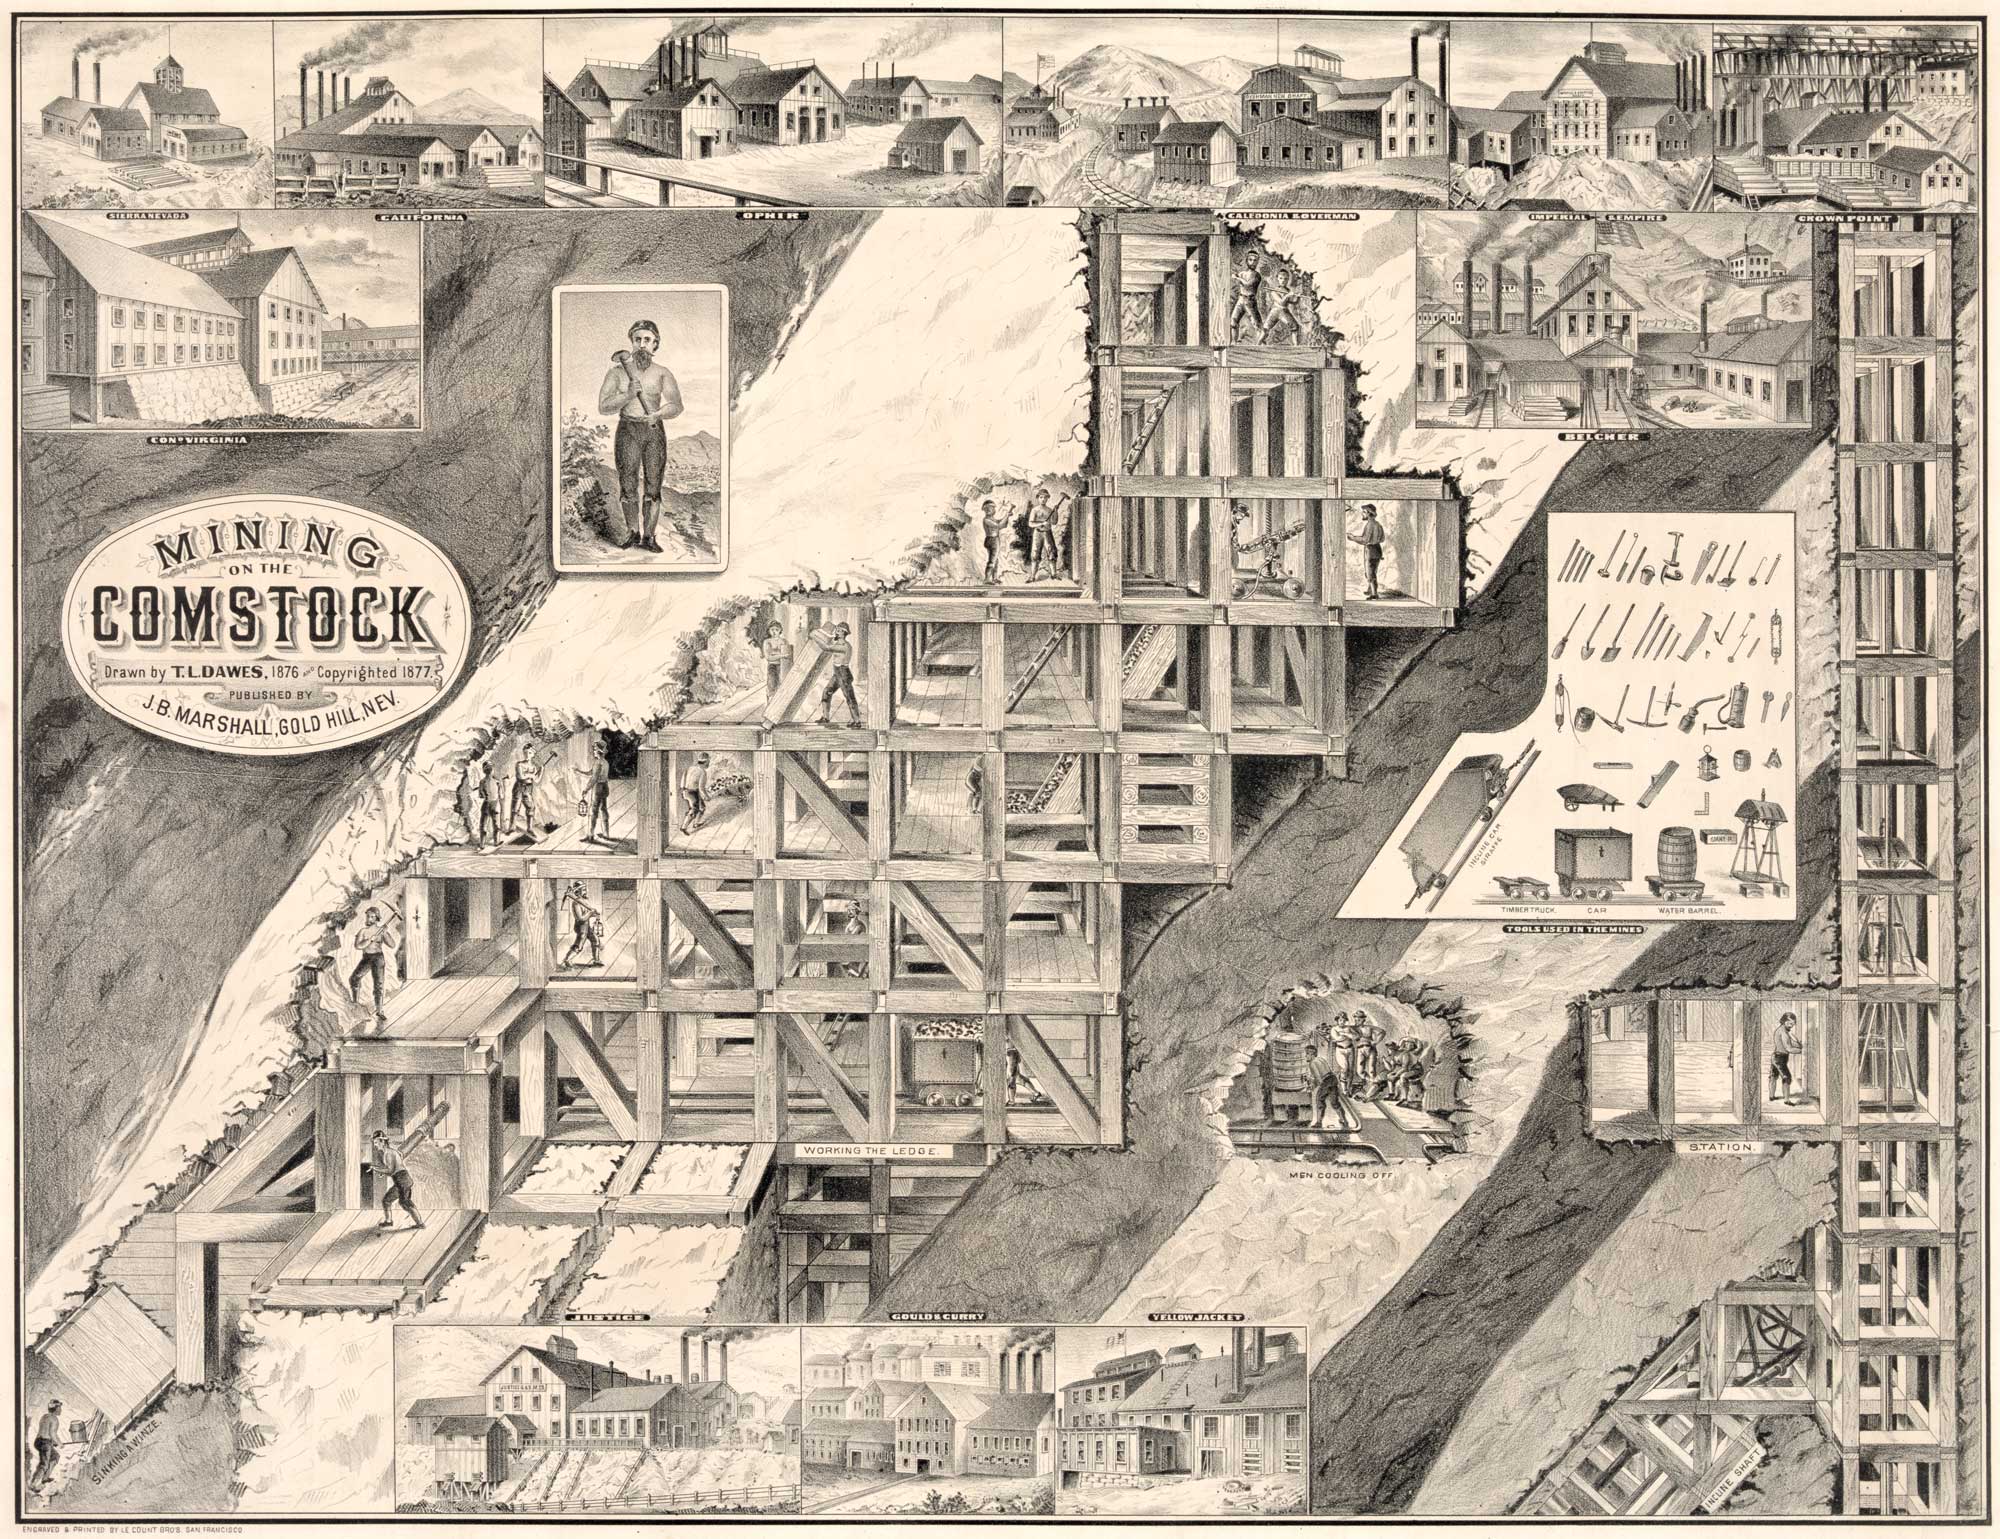 Historical drawing depicting mining operations on the Comstock Lode in Nevada.